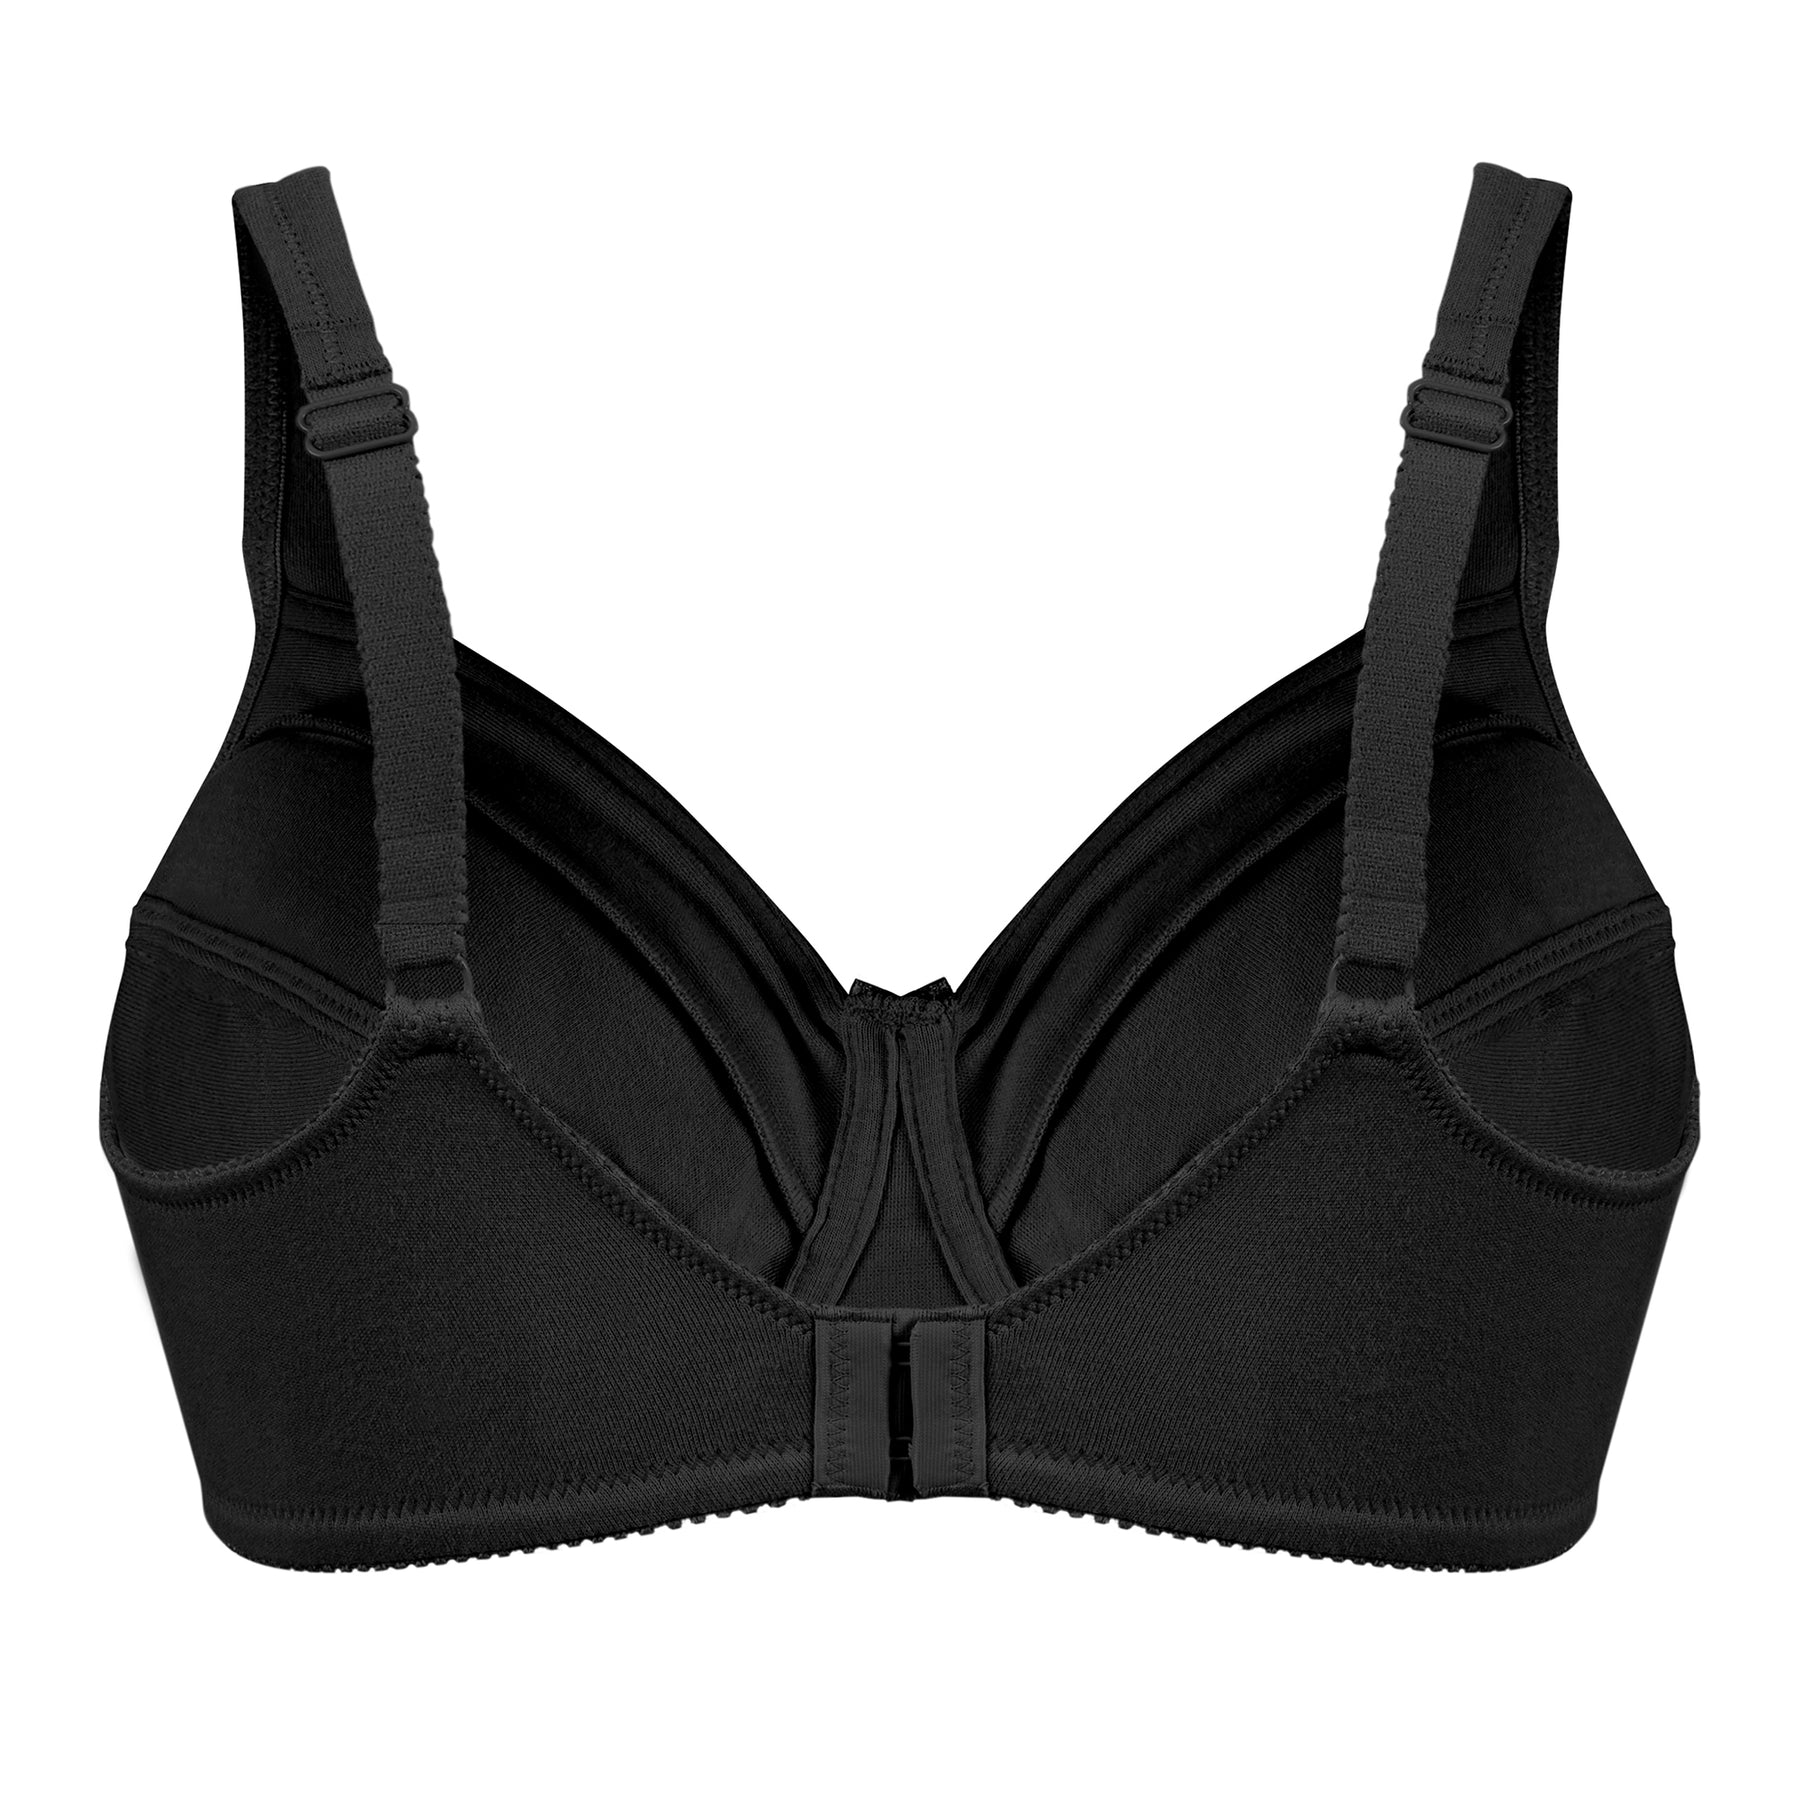 Cotton Plain Ladies Slim Fit Black Bra, for Daily Wear at Rs 65